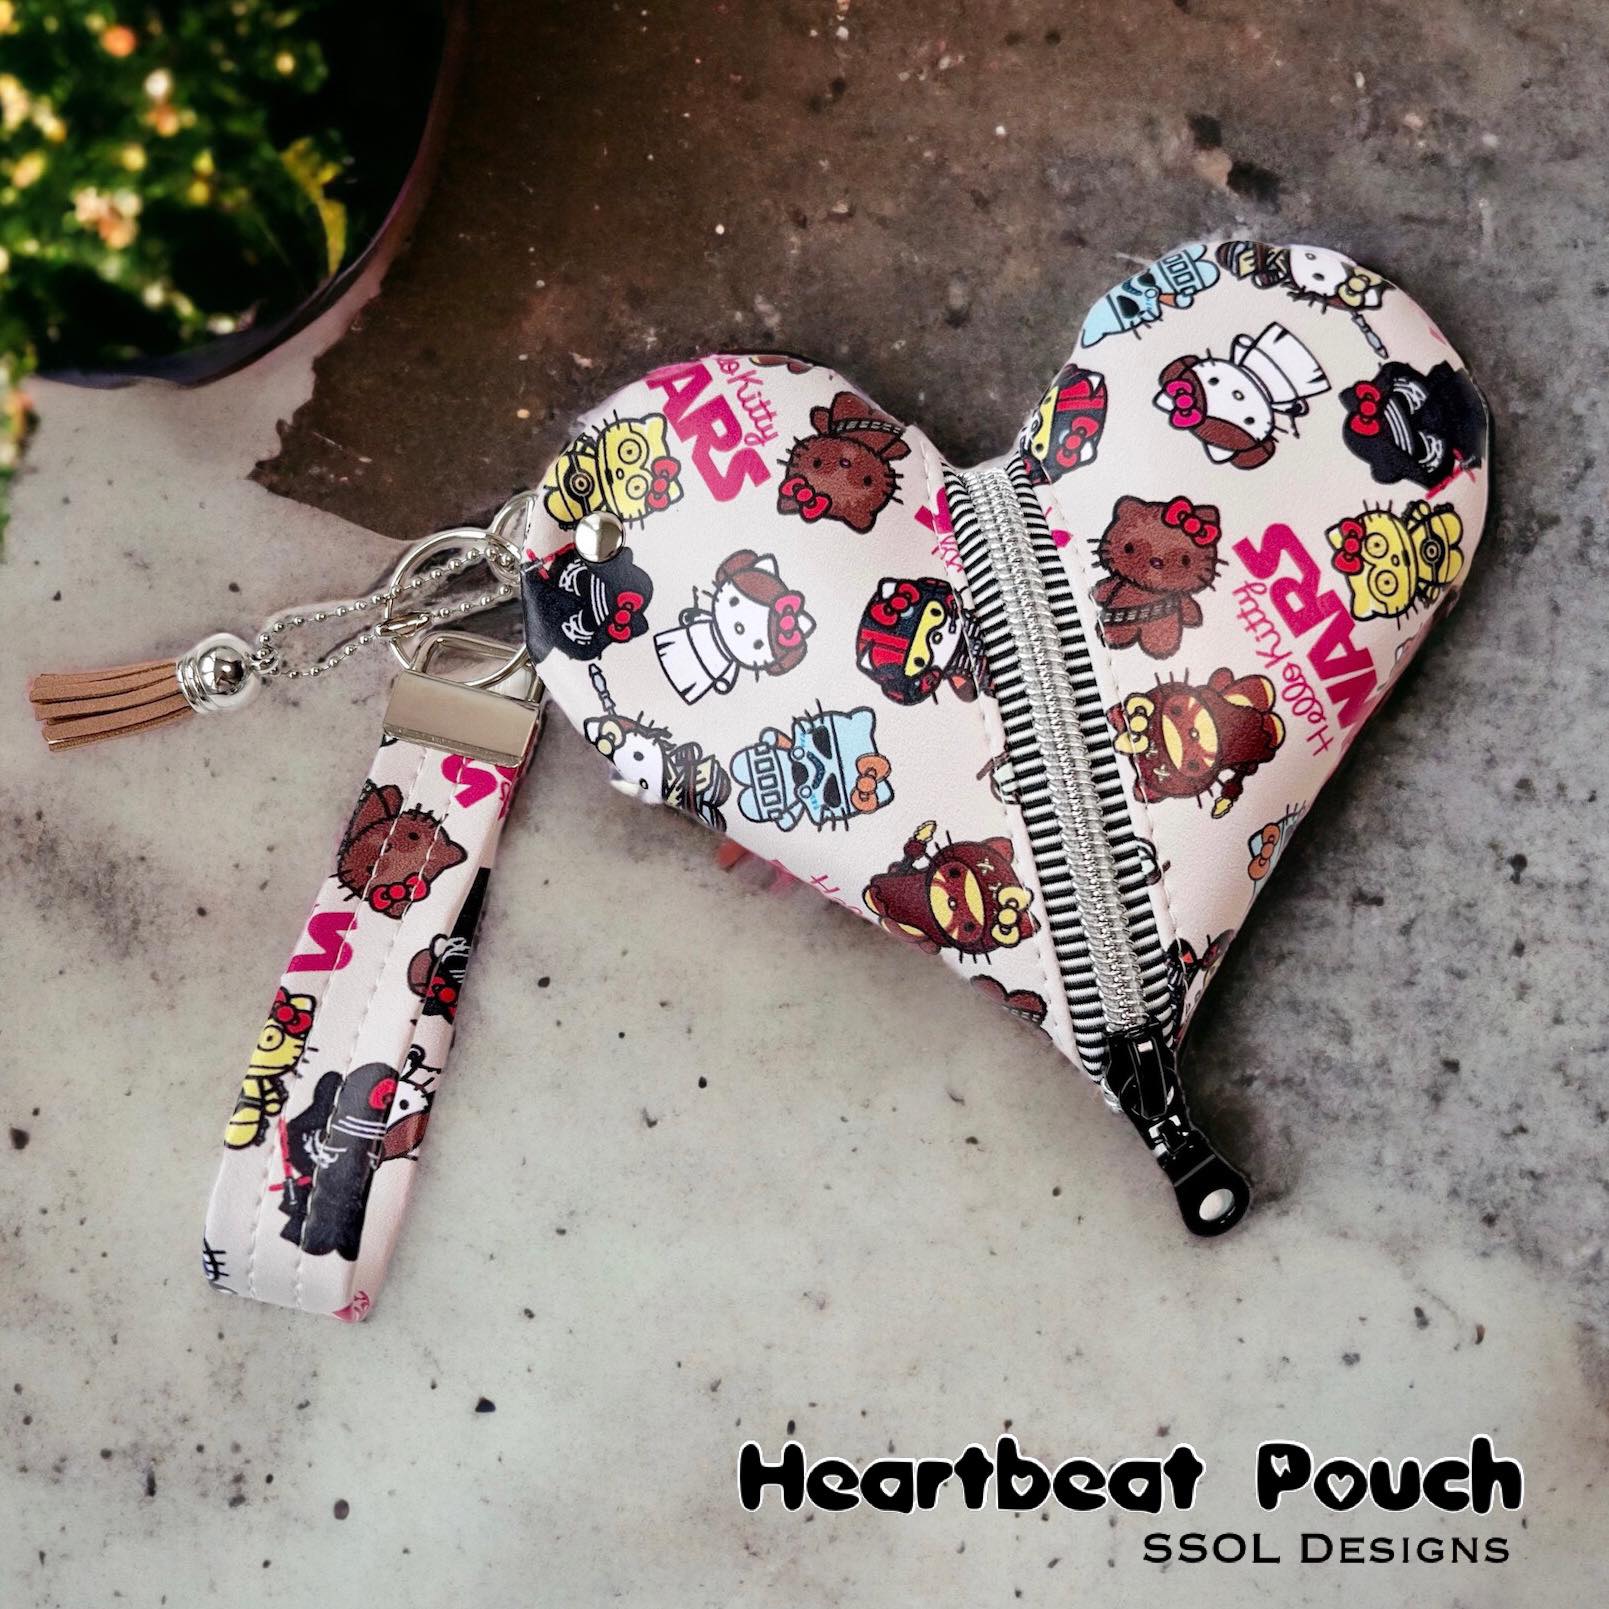 Heartbeat Pouch Pattern – Sewing Seeds of Love Studio